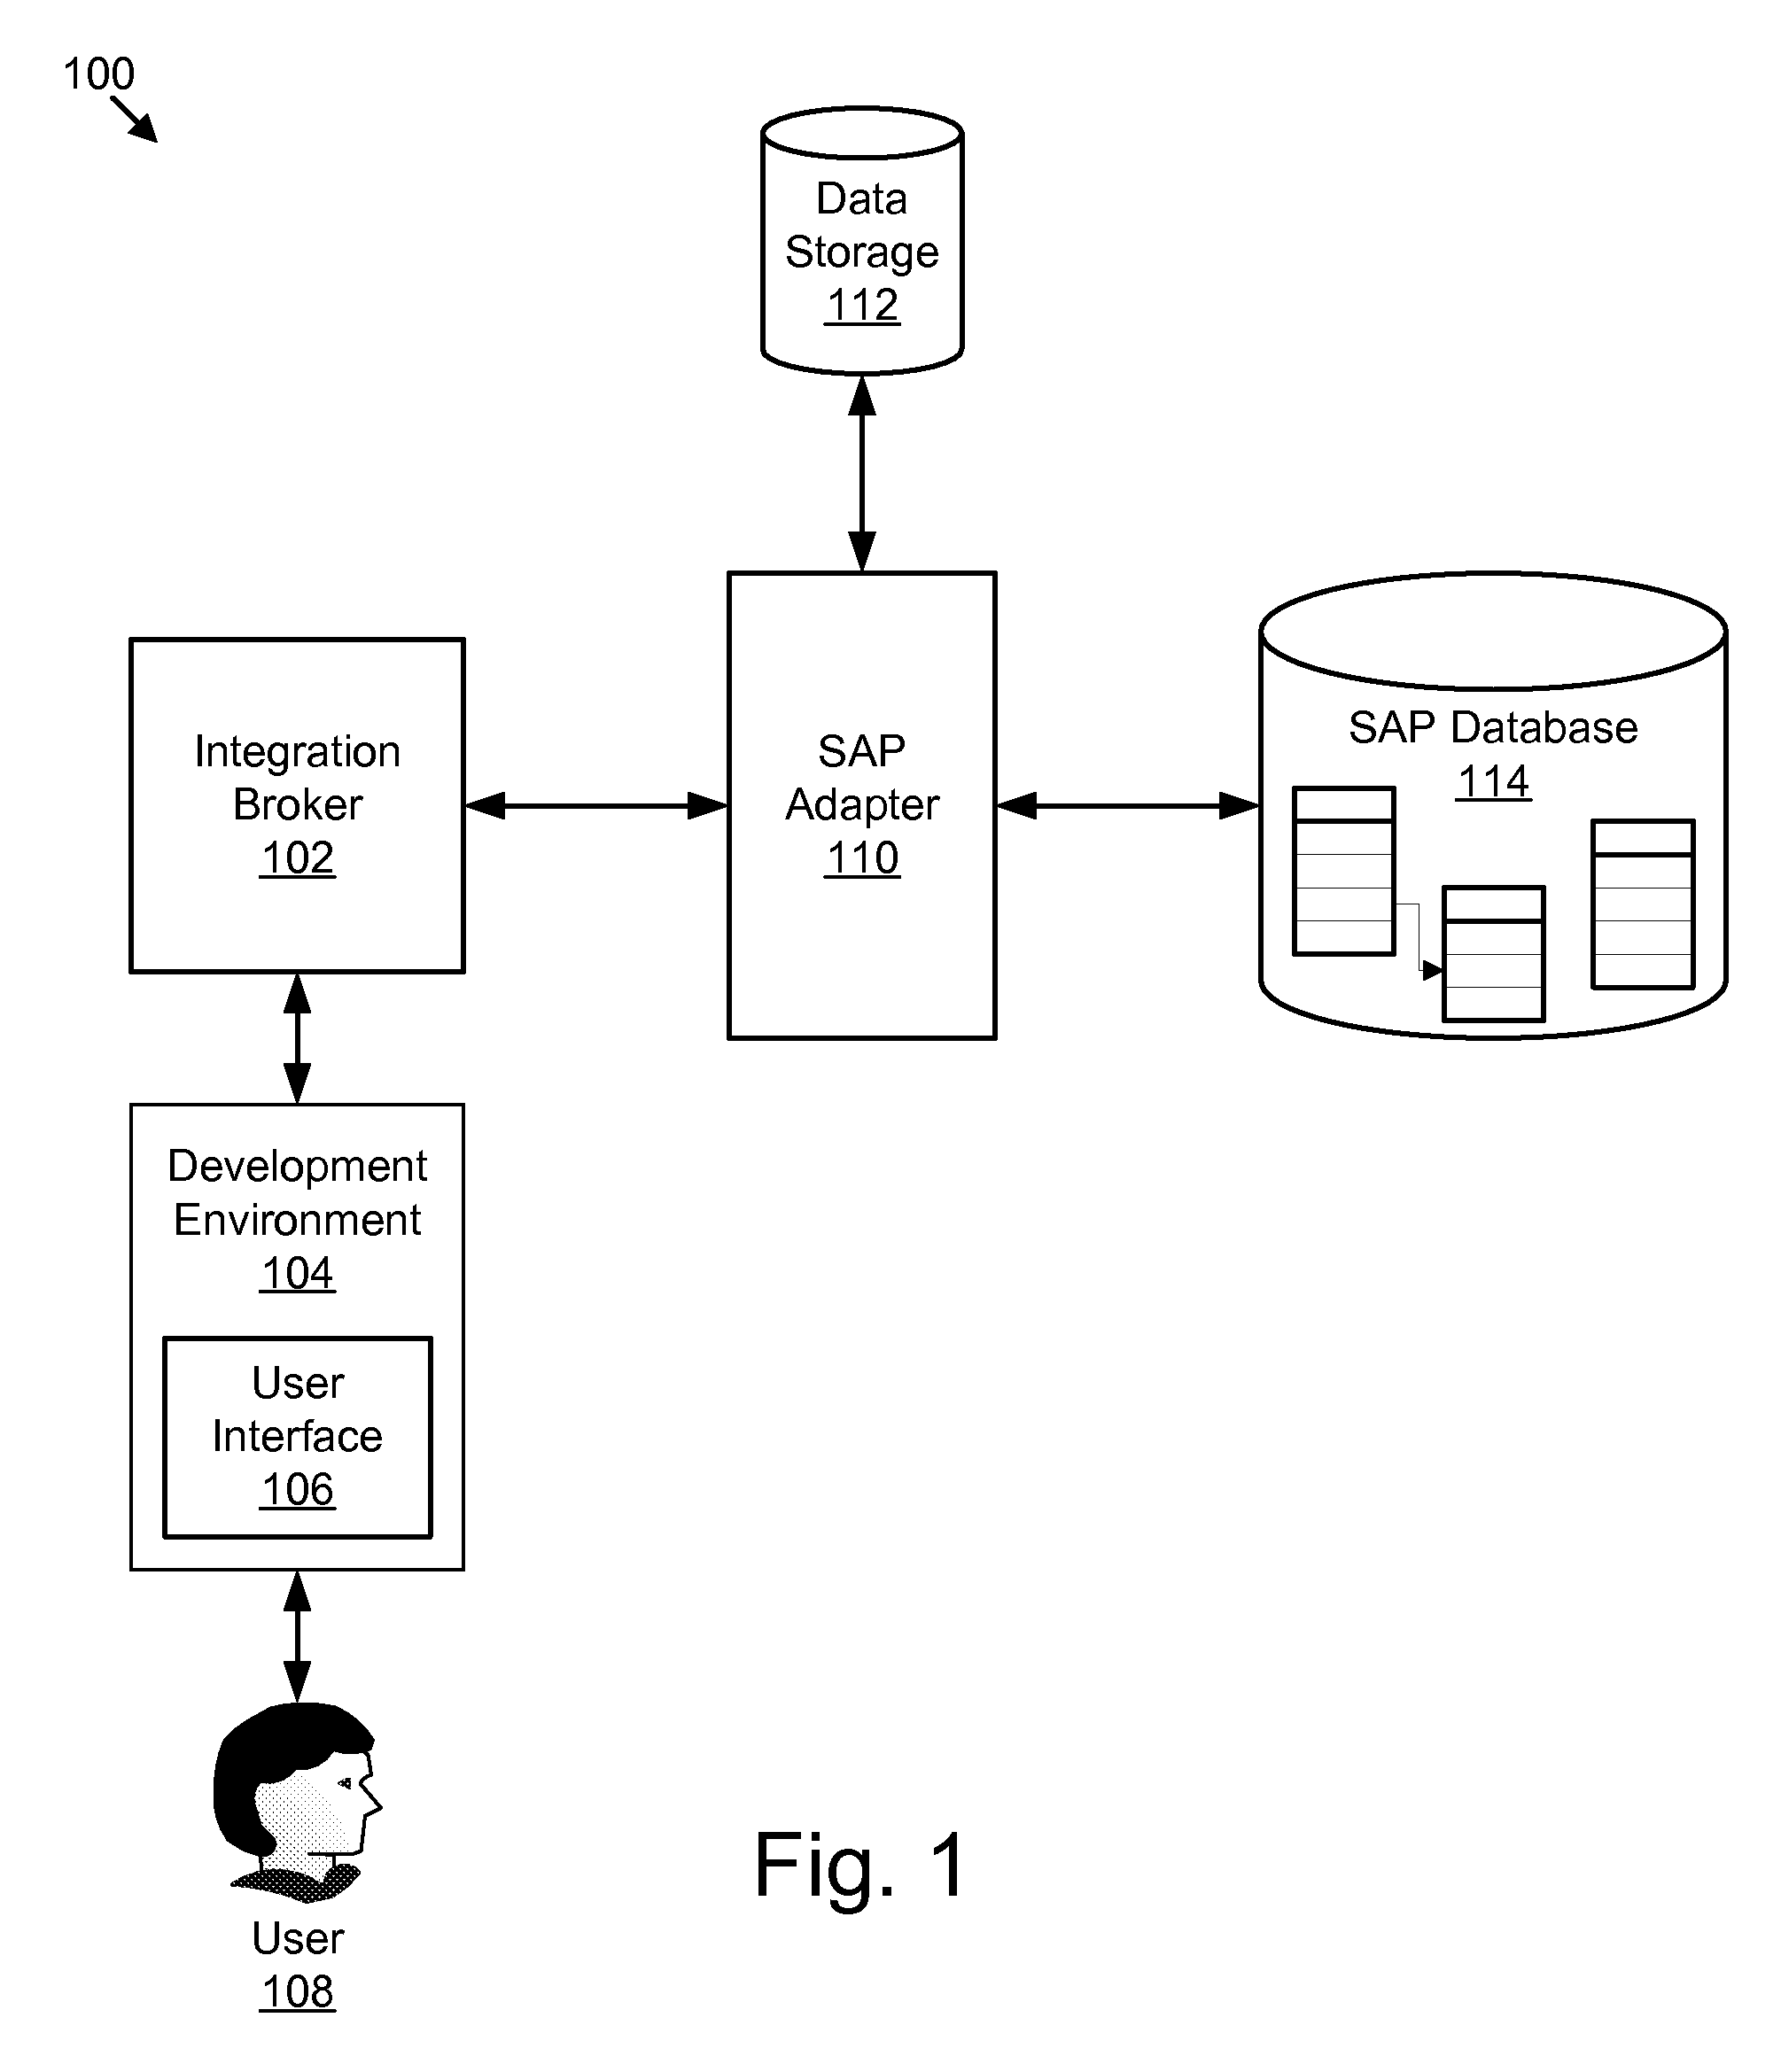 Apparatus, system, and method for direct retrieval of hierarchical data from sap using dynamic queries